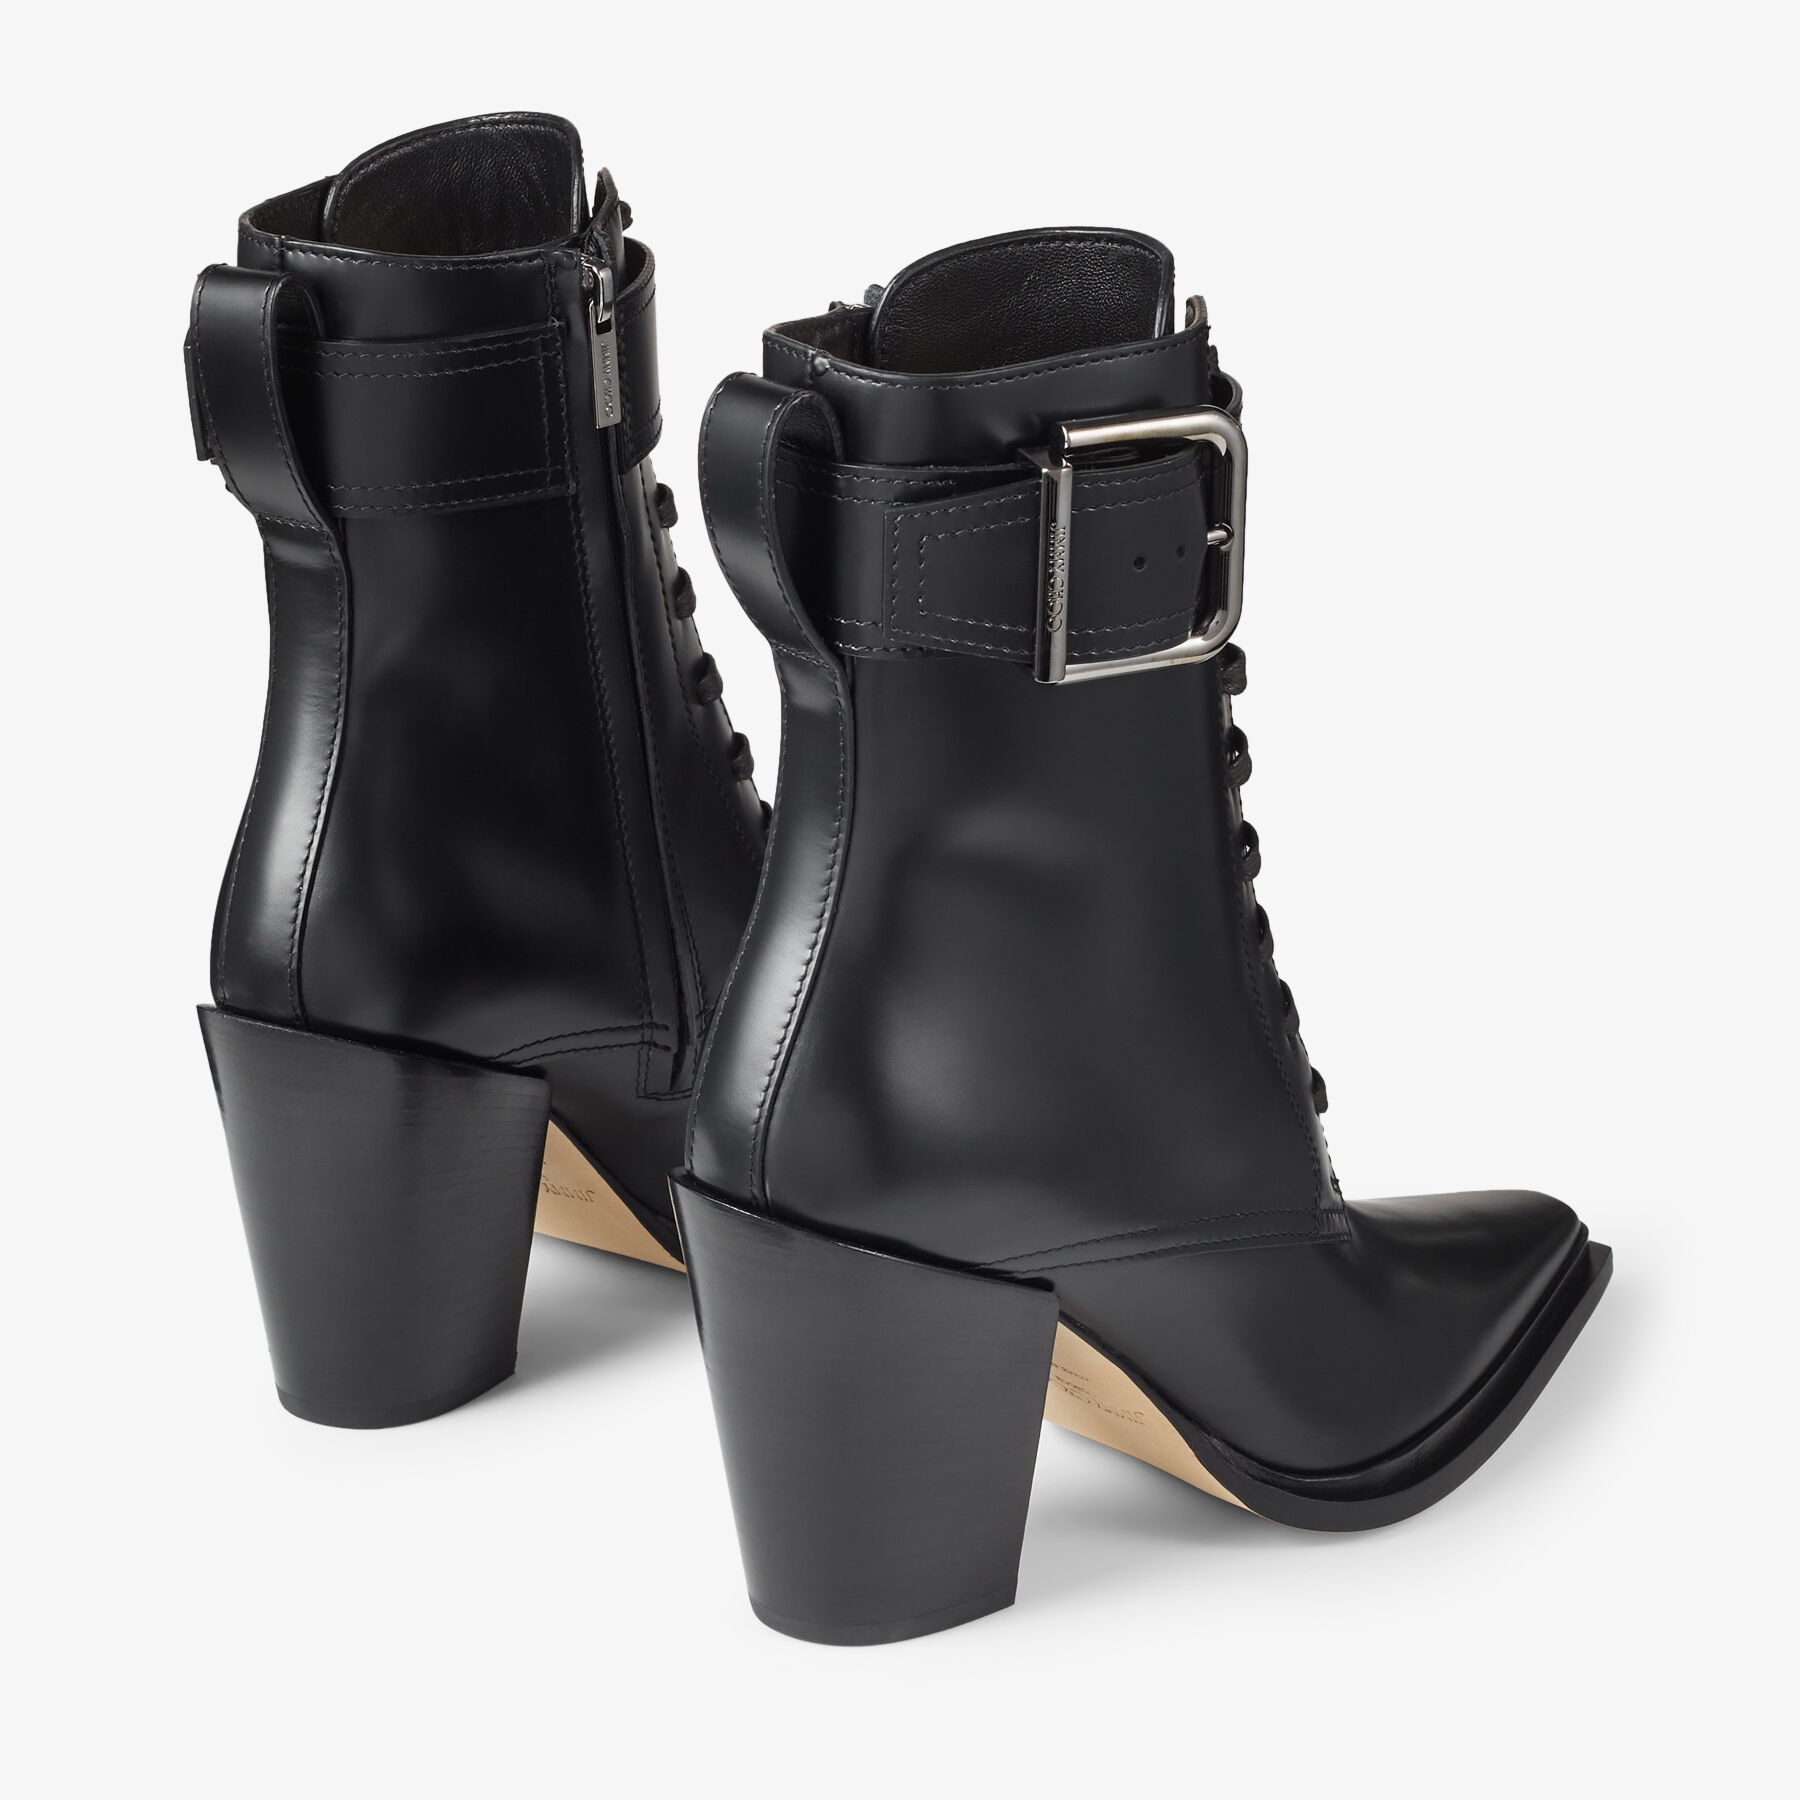 Myos 80
Black Brushed Calf Leather Ankle Boots - 6